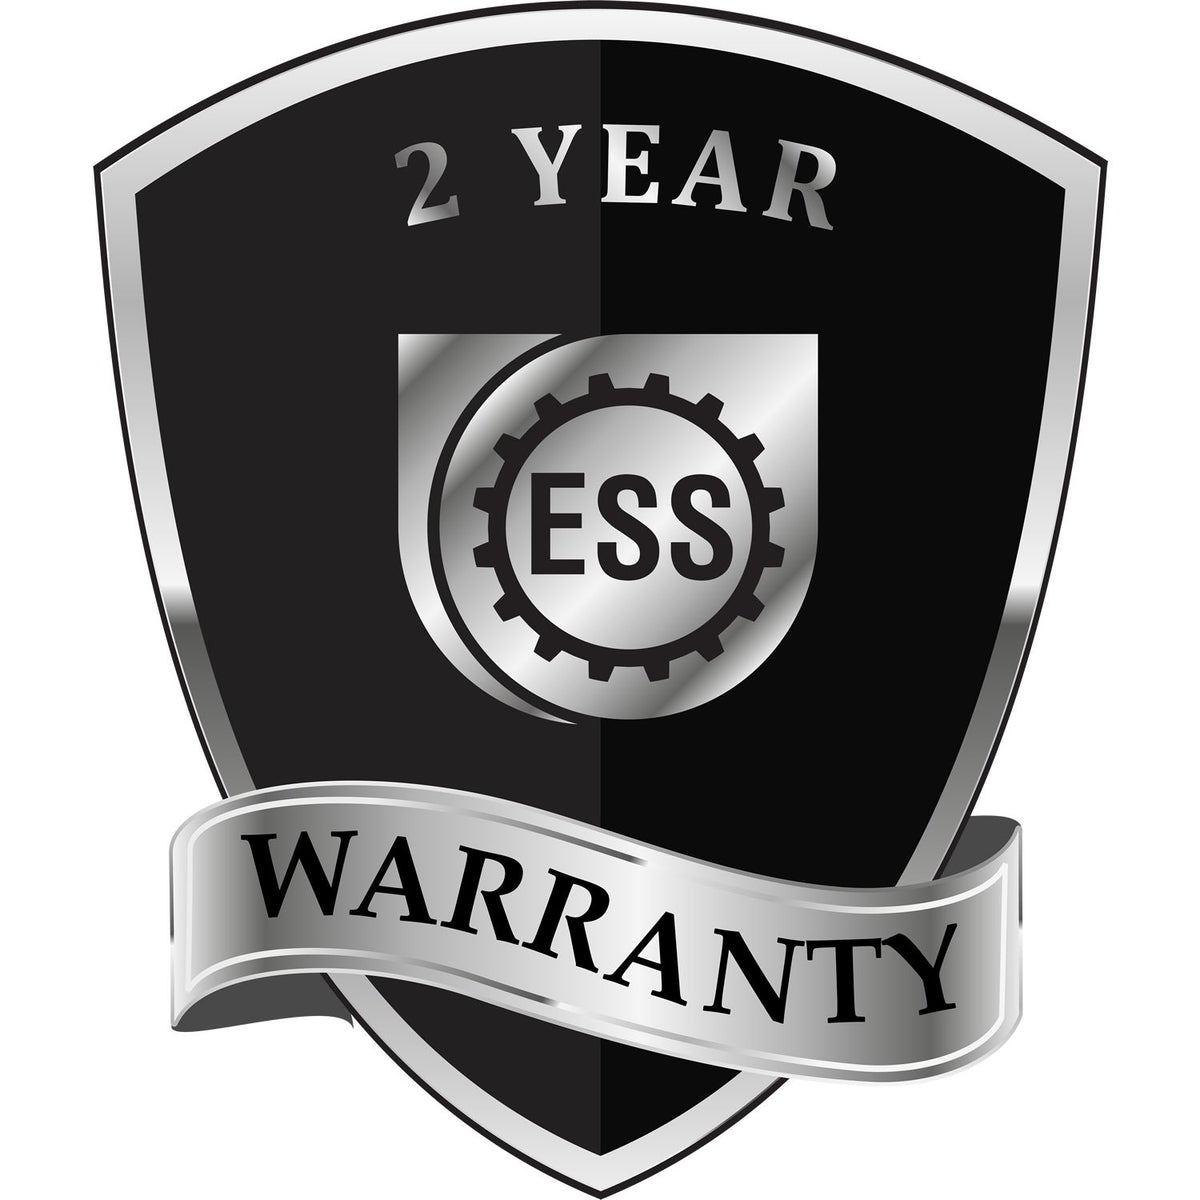 A black and silver badge or emblem showing warranty information for the Long Reach Texas Geology Seal